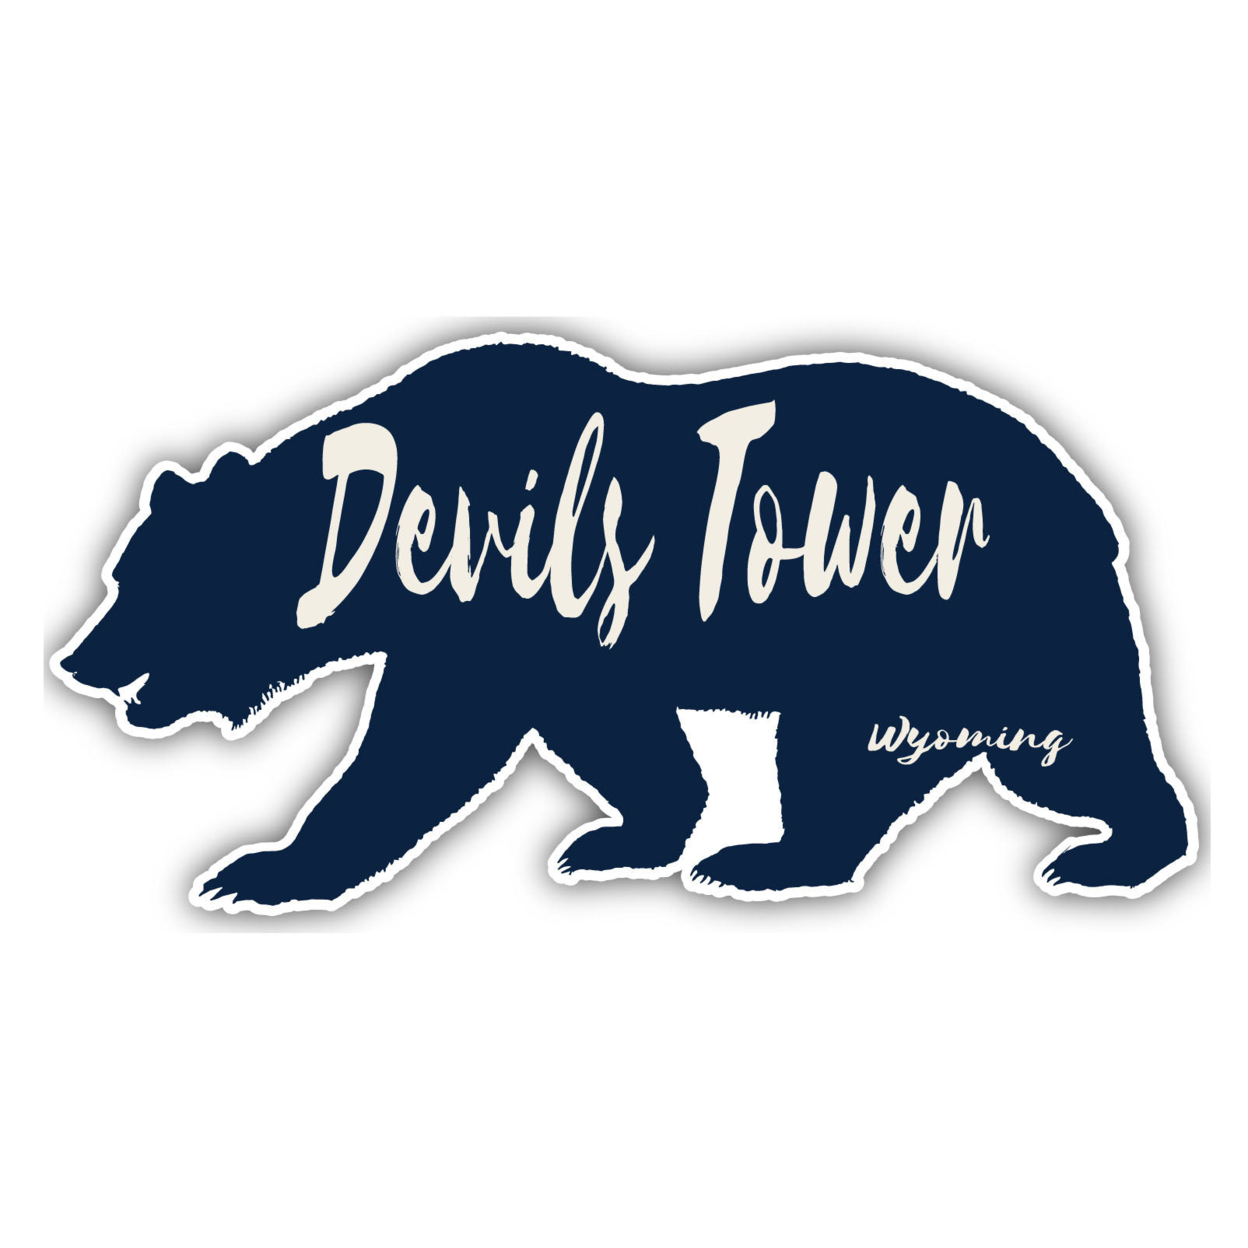 Devils Tower Wyoming Souvenir Decorative Stickers (Choose Theme And Size) - Single Unit, 2-Inch, Tent